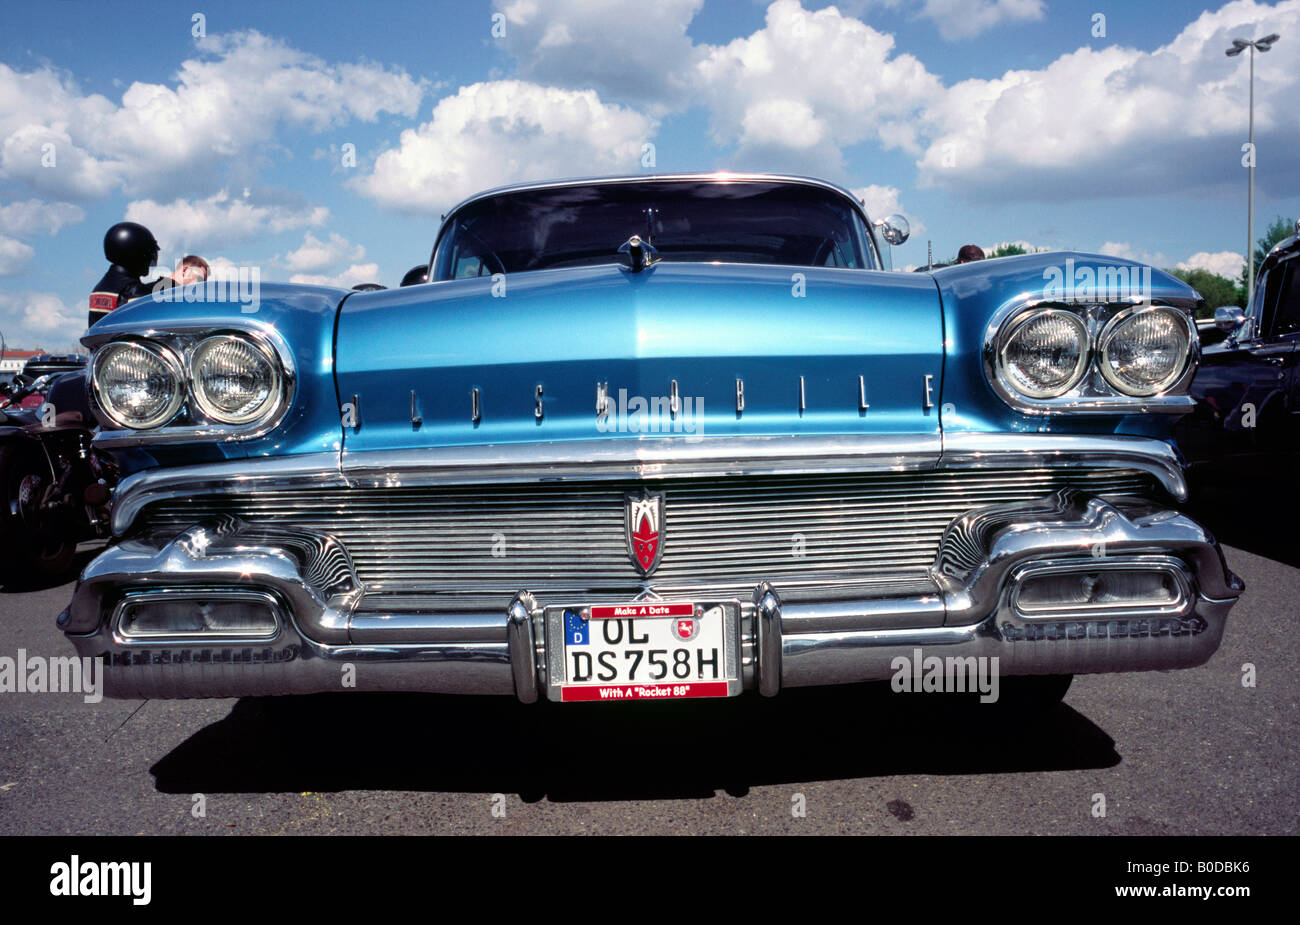 'Make a date with a Rocket 88', 1958 Super 88 Oldsmobile (Rocket engine) at the Street Mag Show in Hamburg. Stock Photo